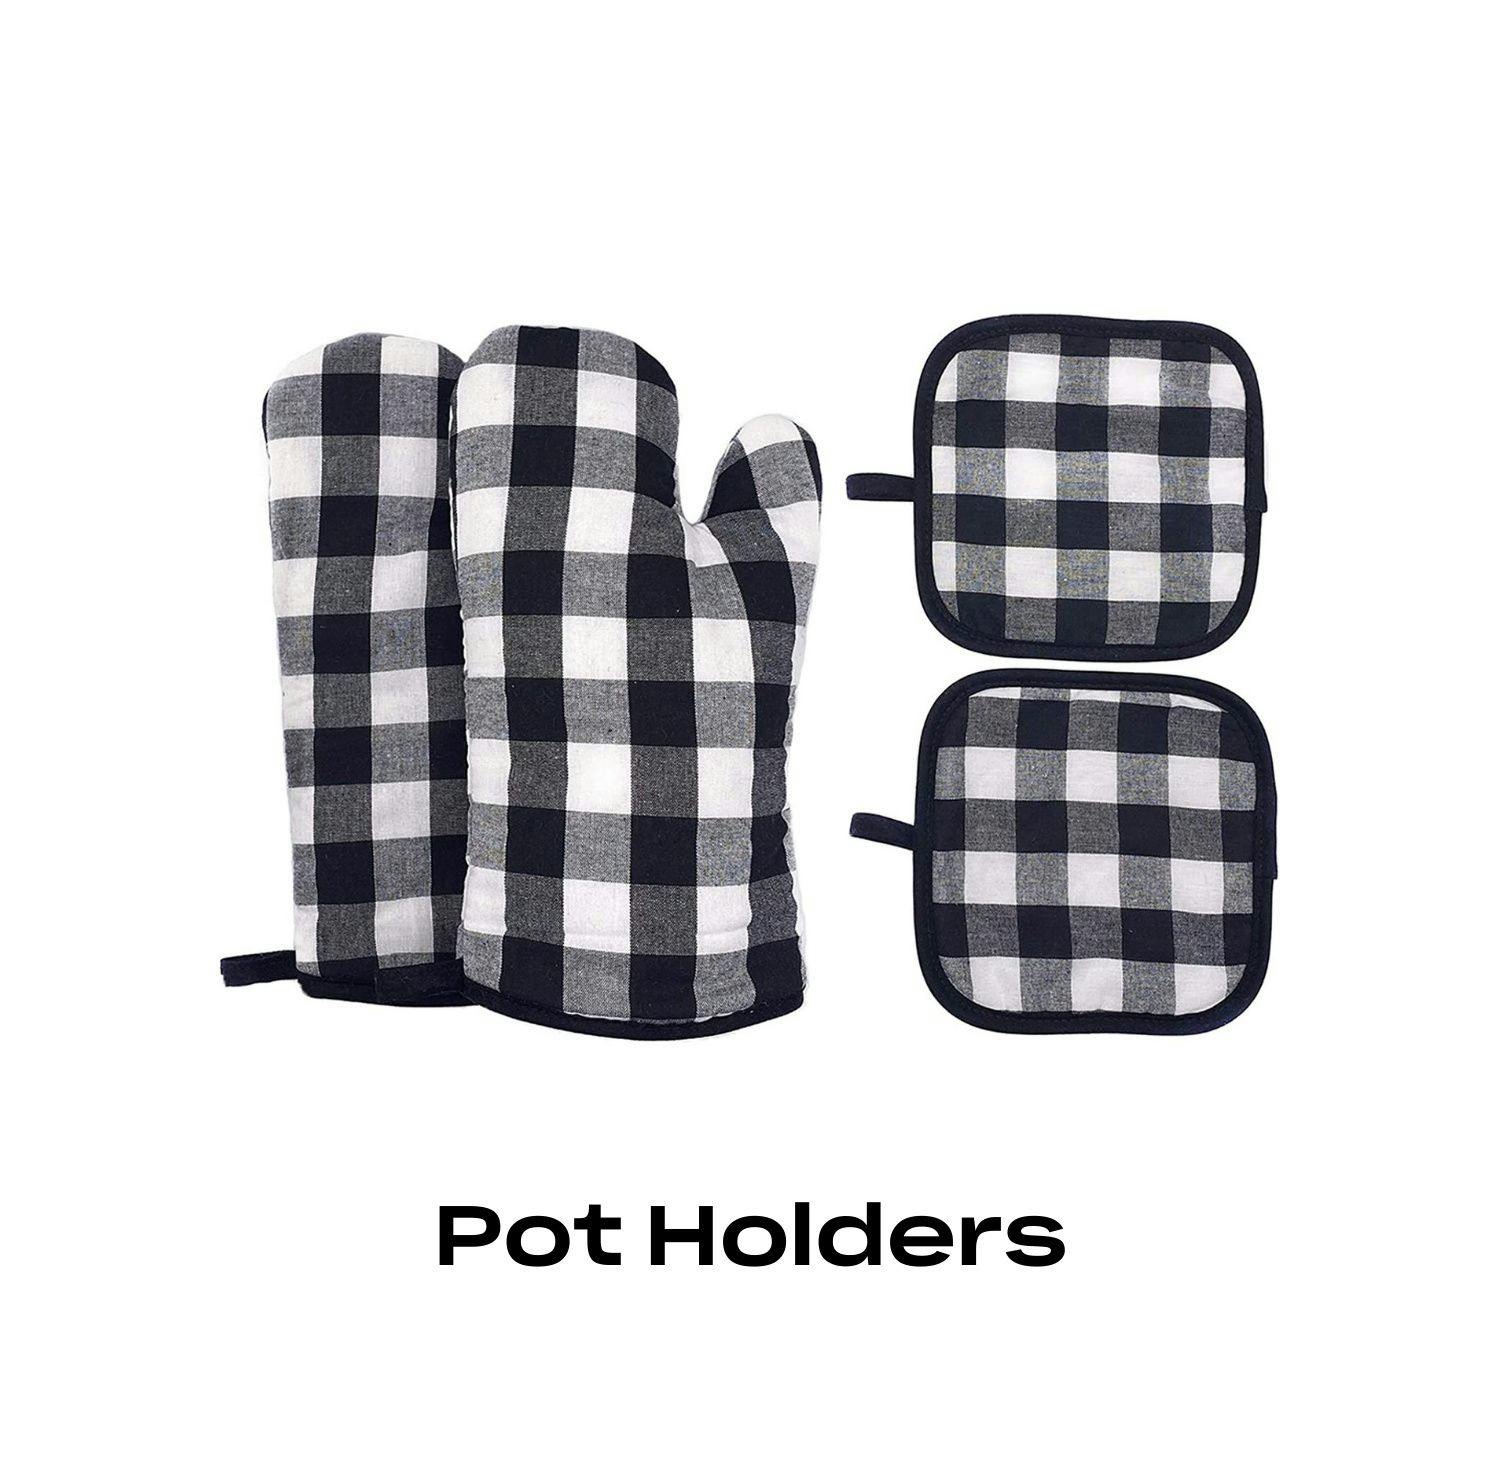 Black and white checkered oven mitt and pot holders on a white background.